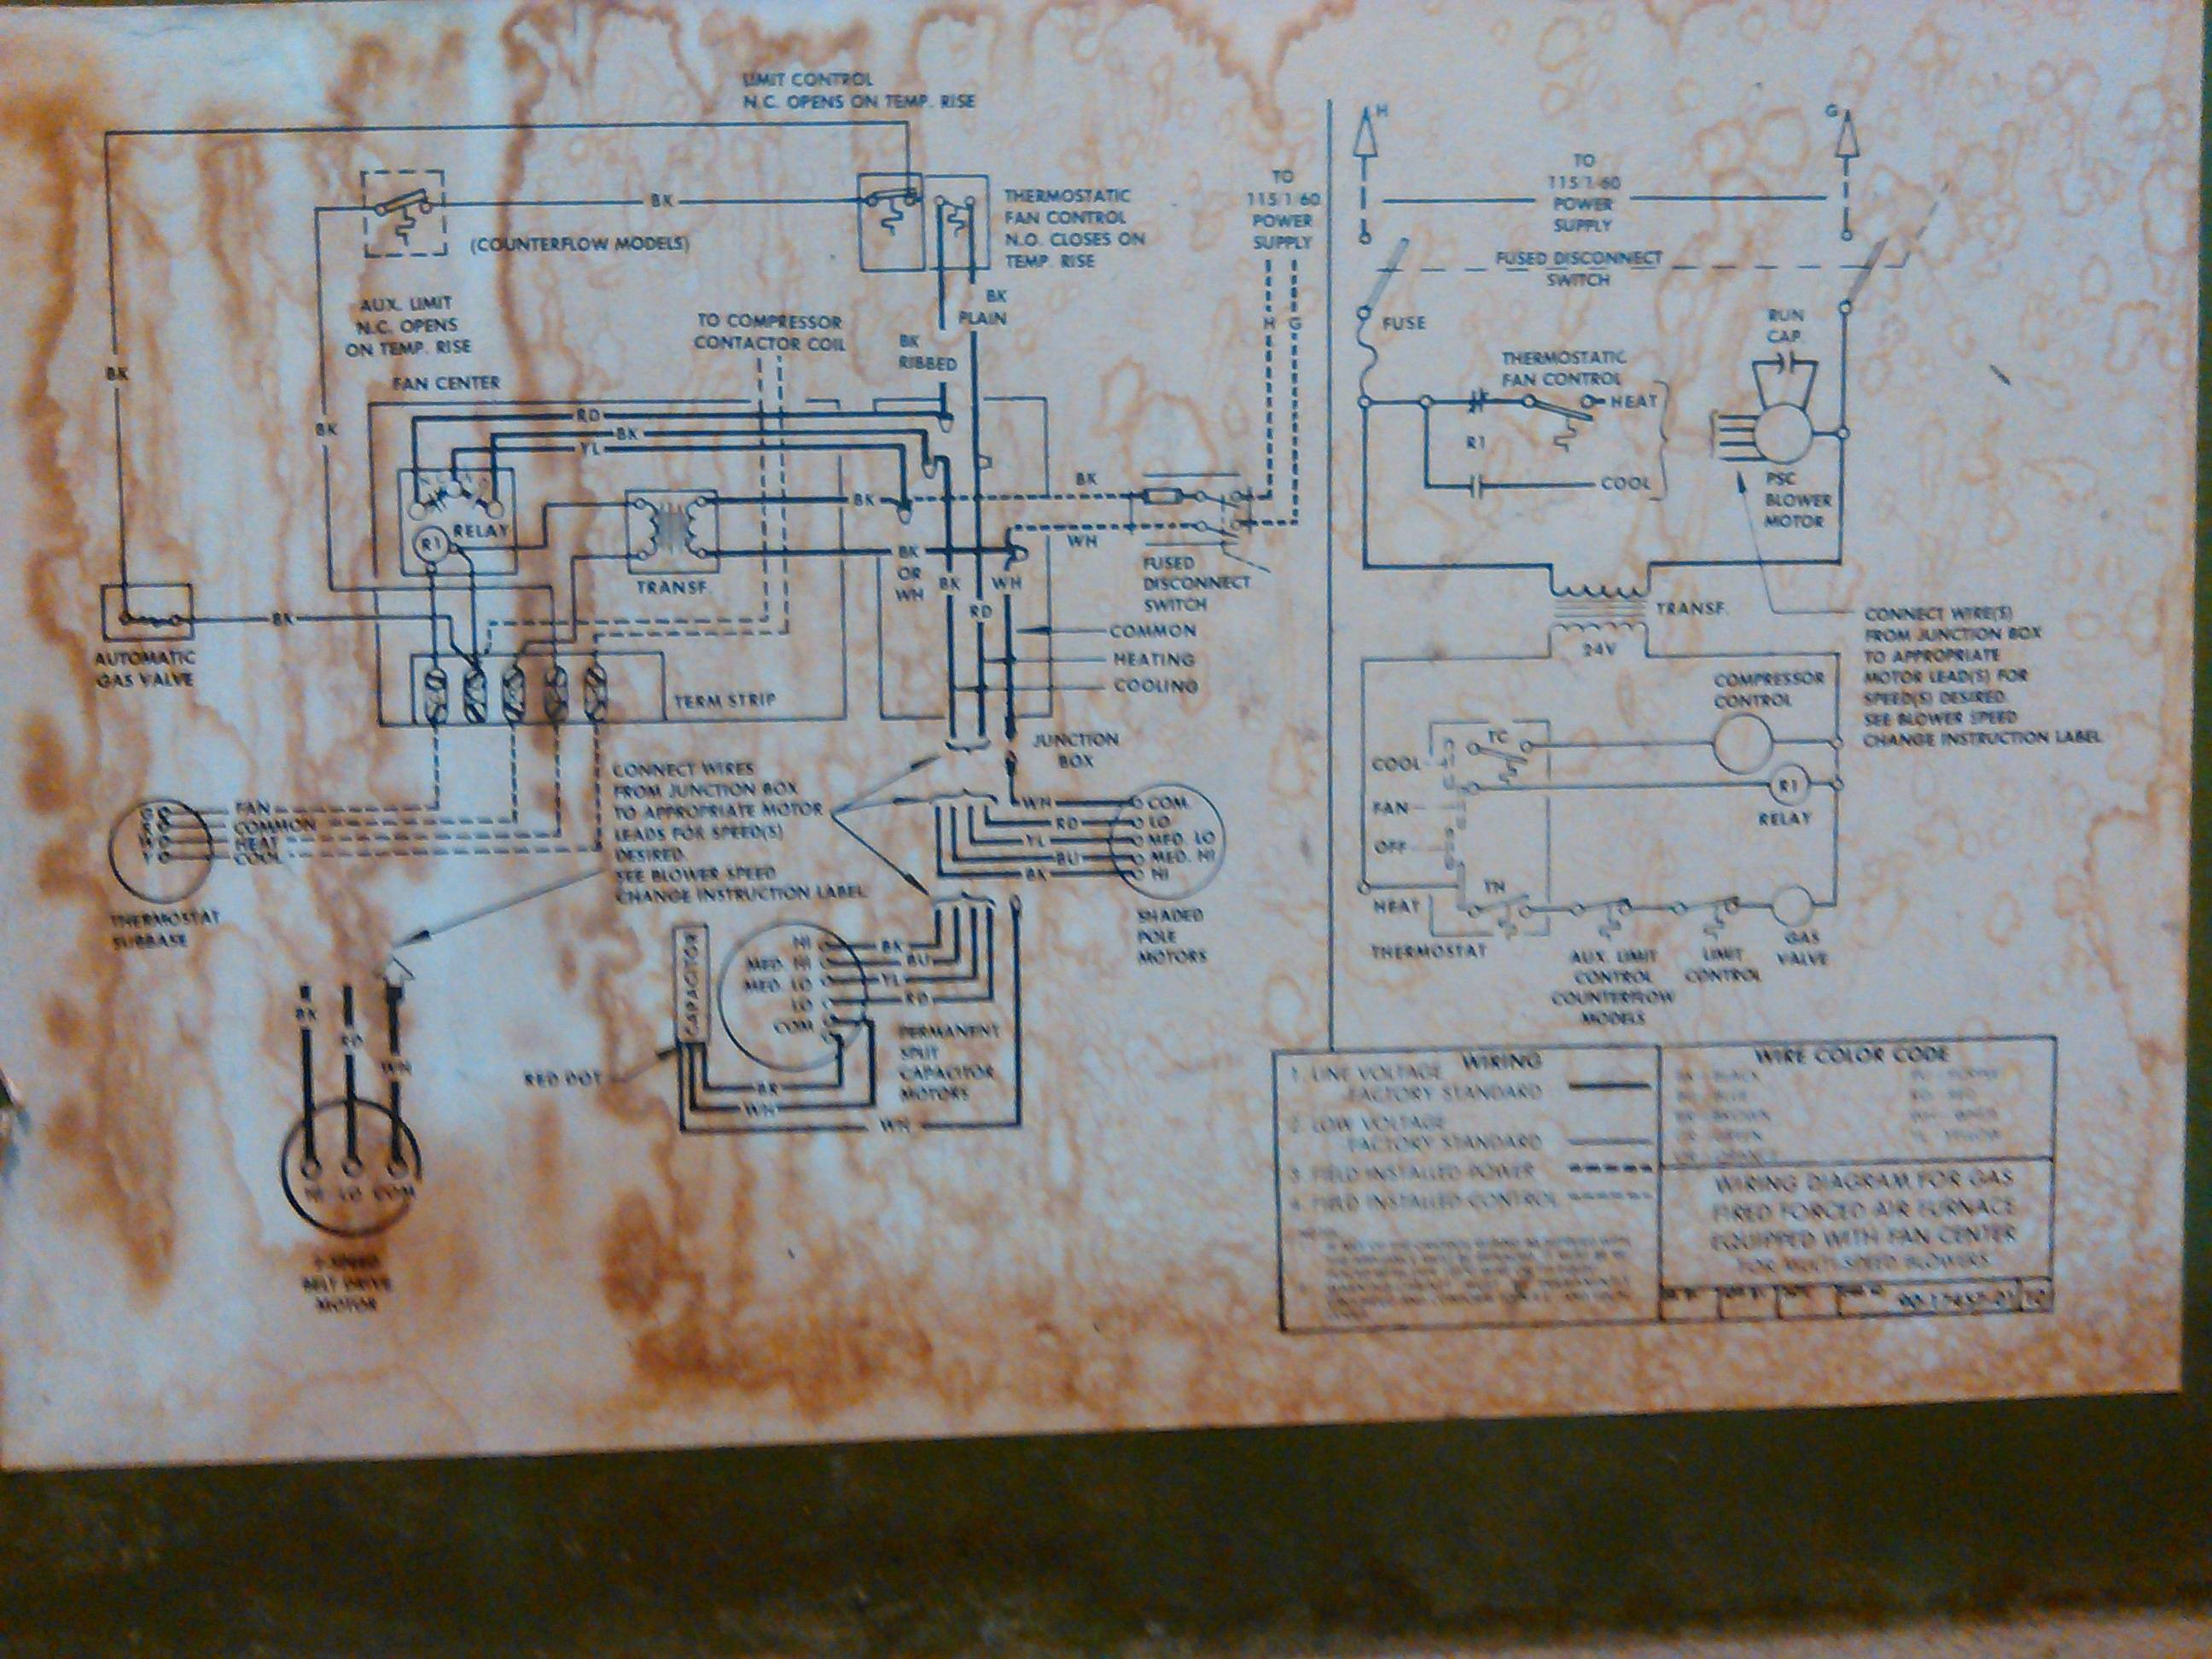 Hvac - Replace Old Furnace Blower Motor With A New One But The Wires - Furnace Blower Motor Wiring Diagram